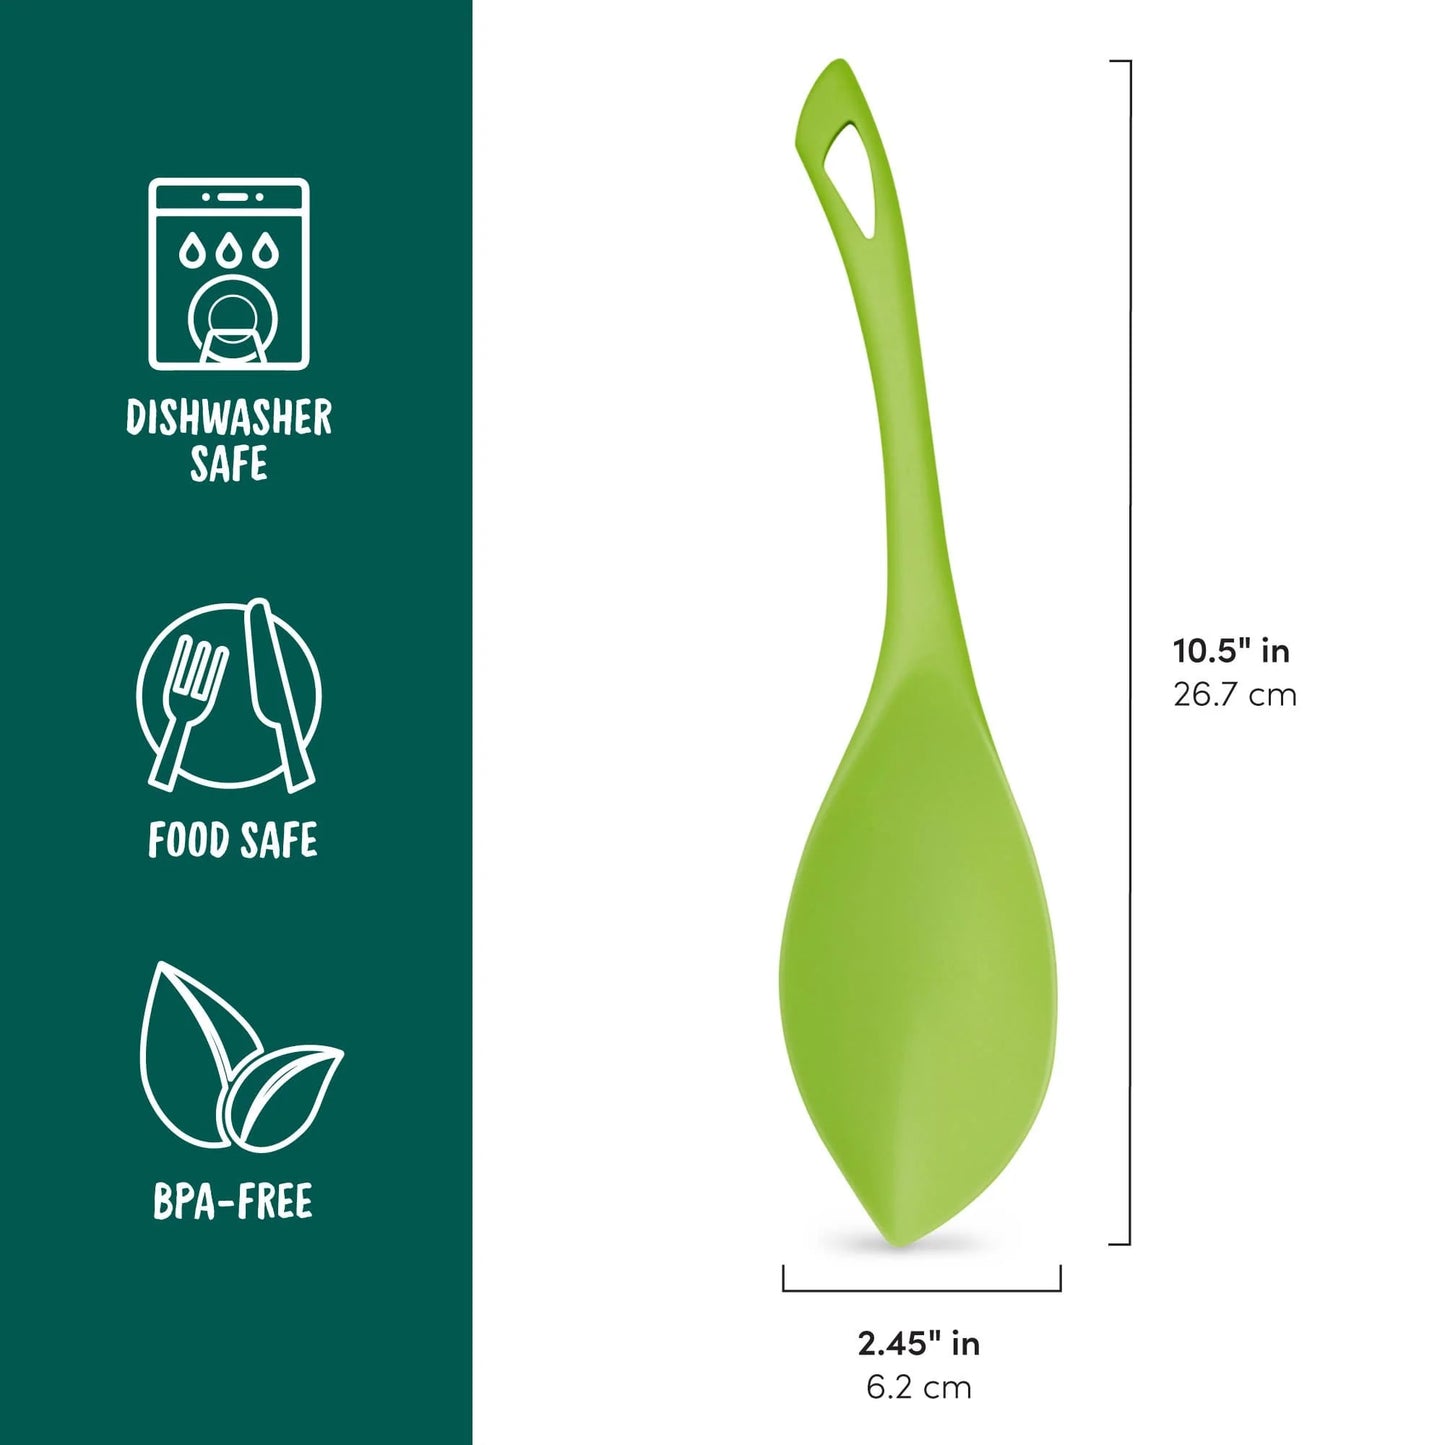 Sprout Spoon + Spatula